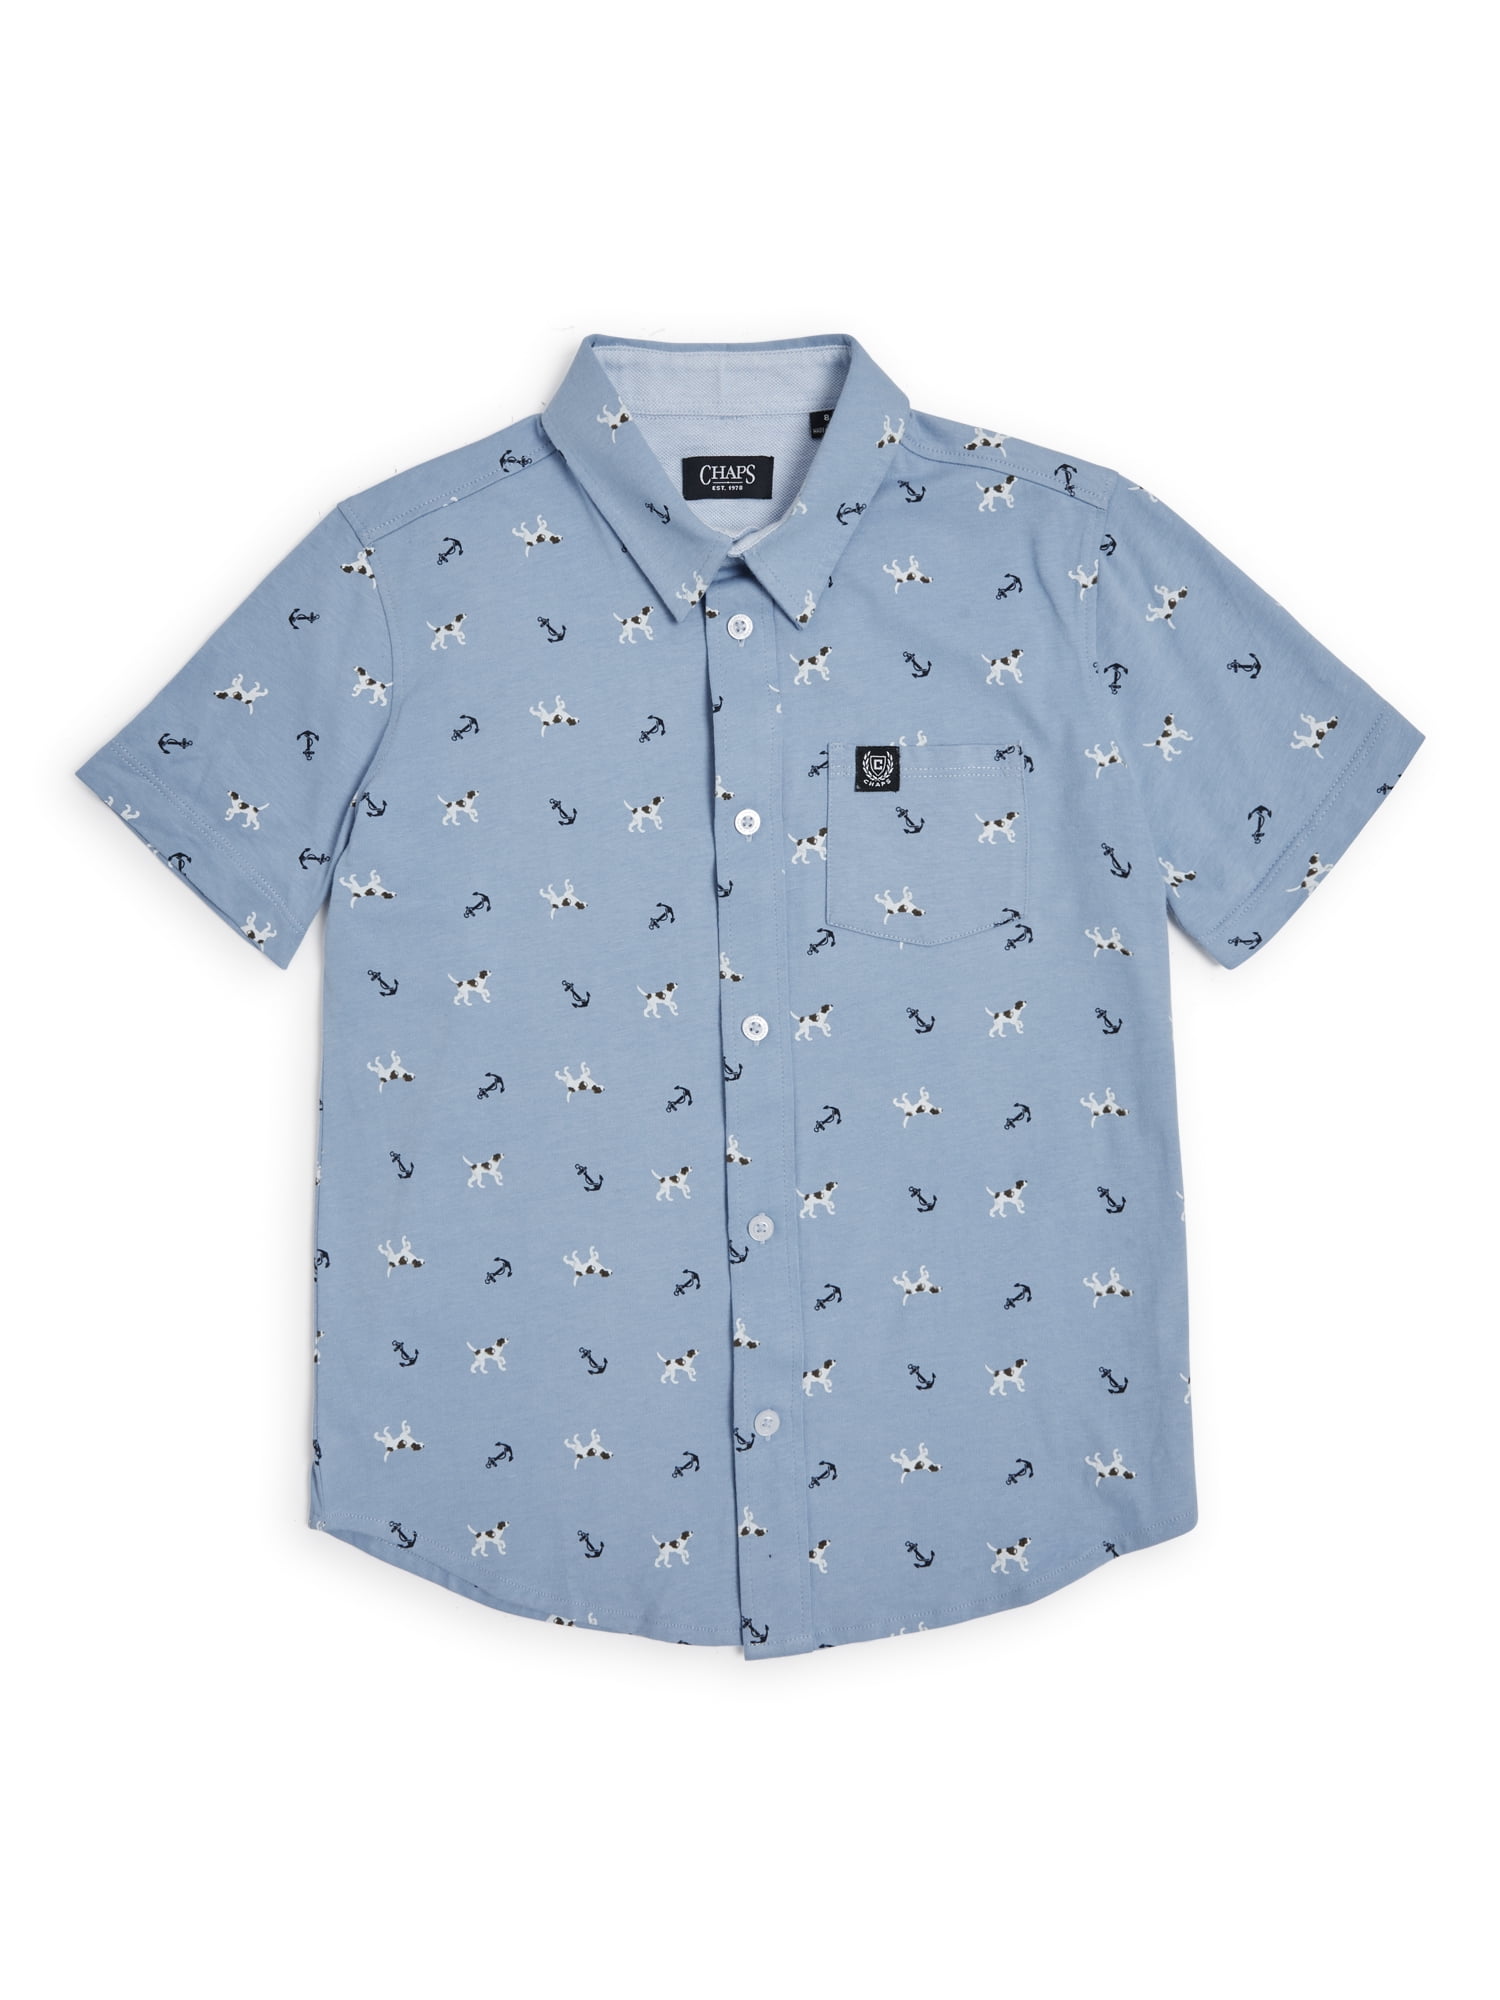 Chaps Boys The Seacoast Printed Jersey Button-Down Short Sleeve Shirt ...